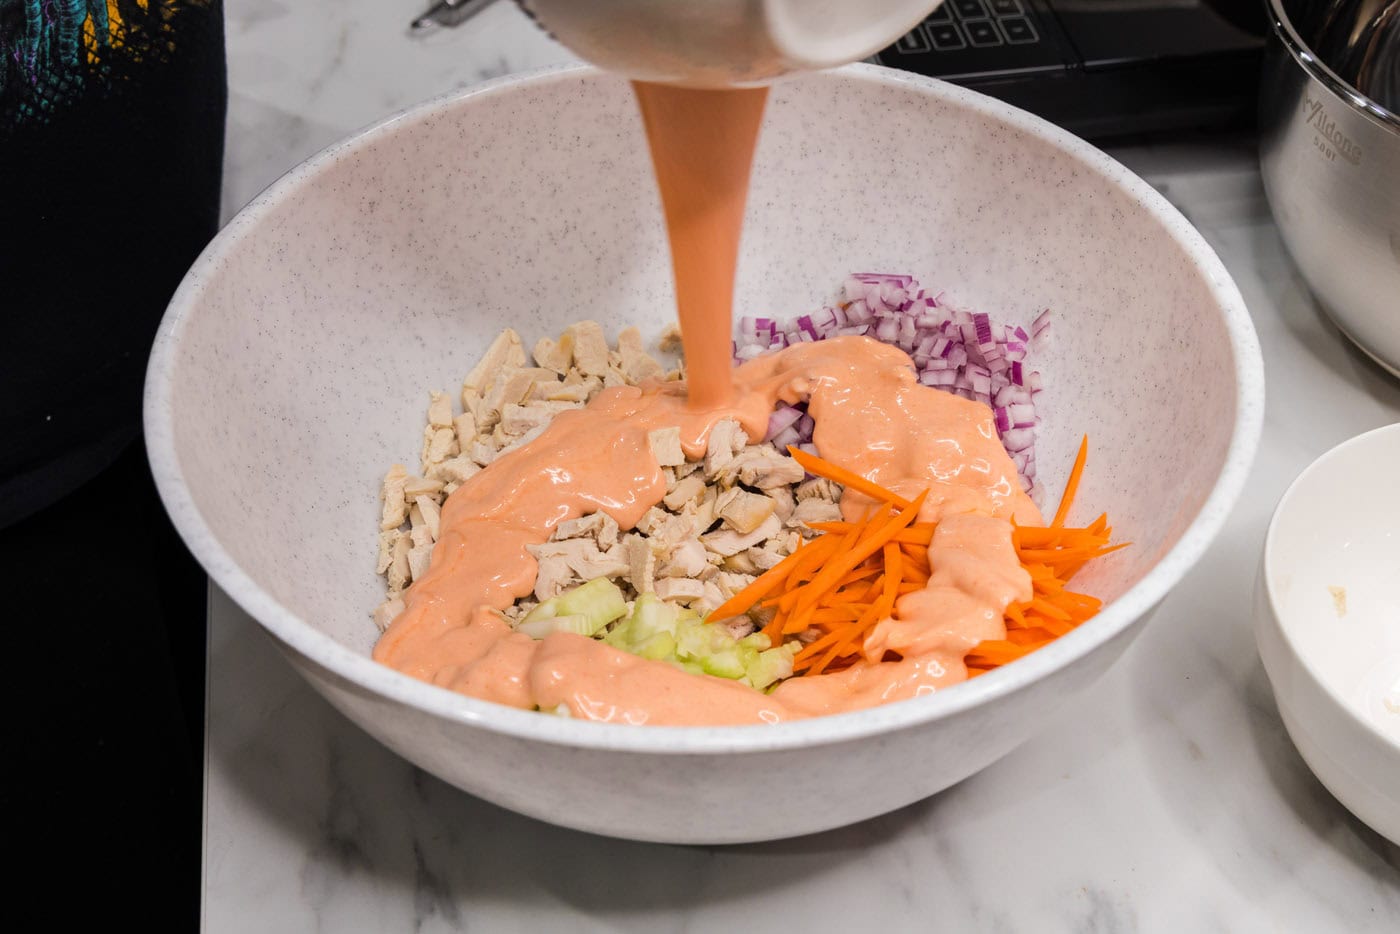 pouring buffalo sauce over chicken and vegetables in a bowl